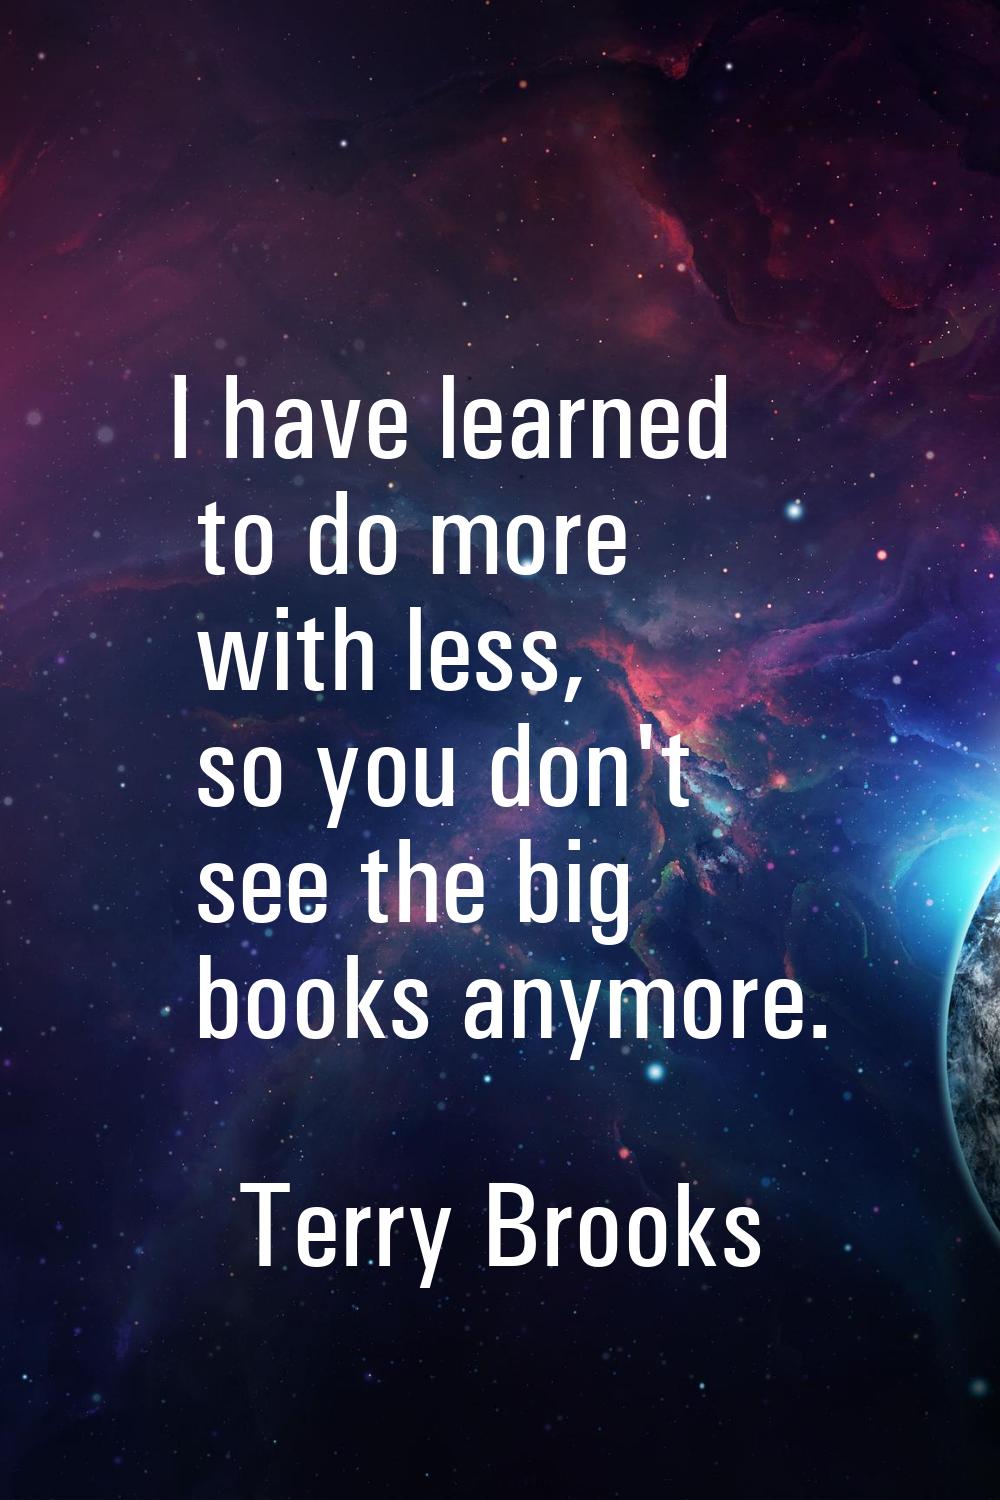 I have learned to do more with less, so you don't see the big books anymore.